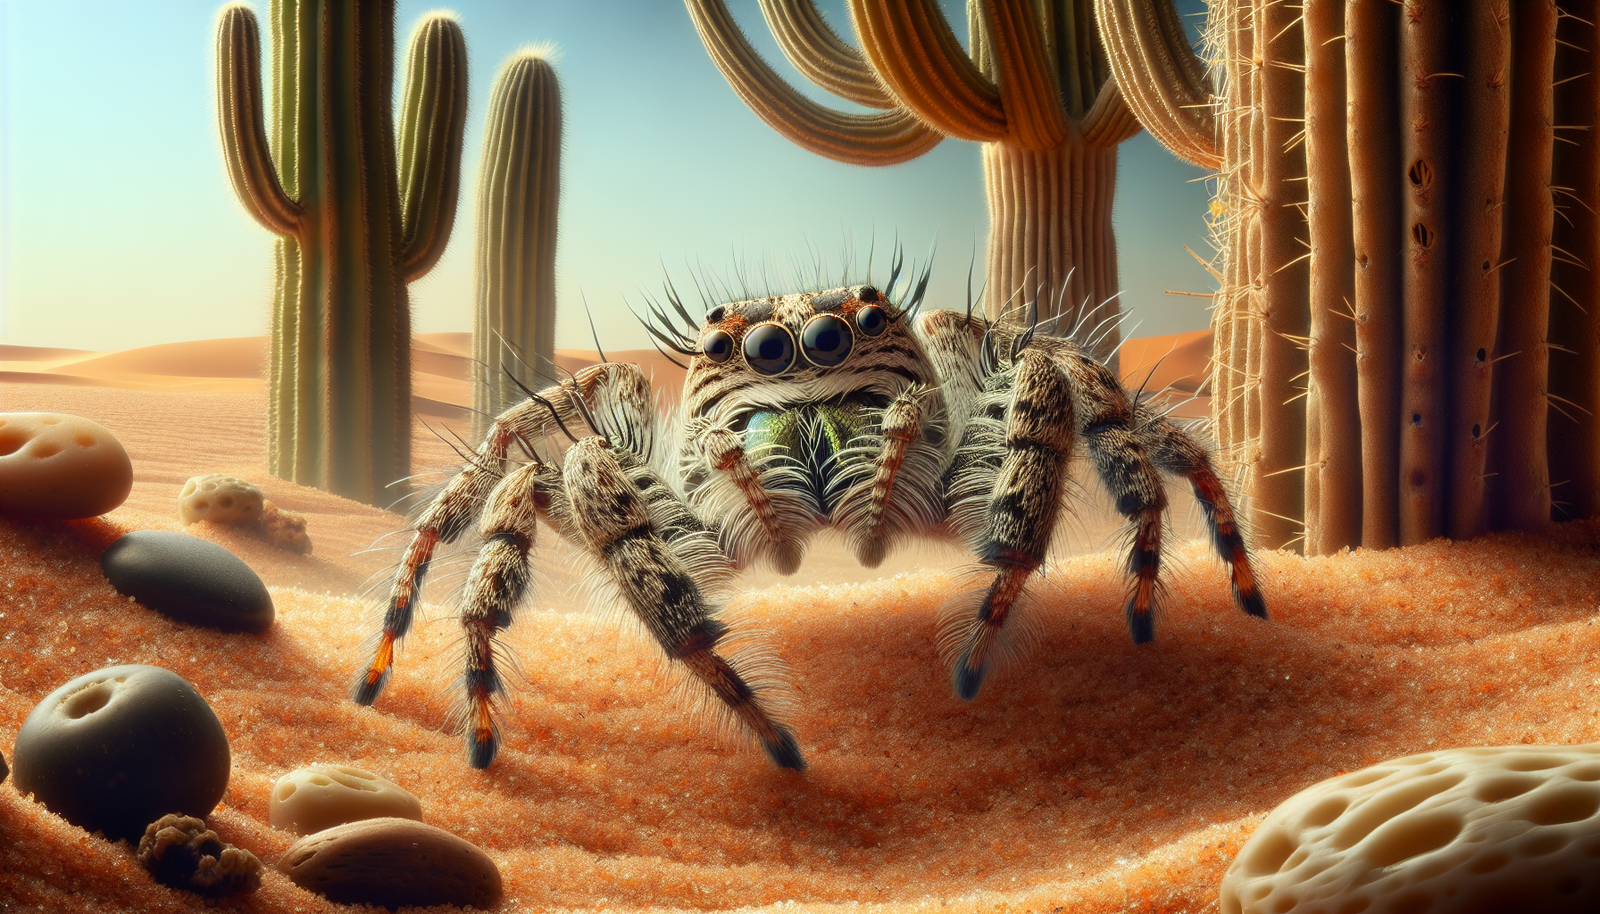 Can You Recommend Some Desert-dwelling Jumping Spider Species That Are Suitable For Captivity?